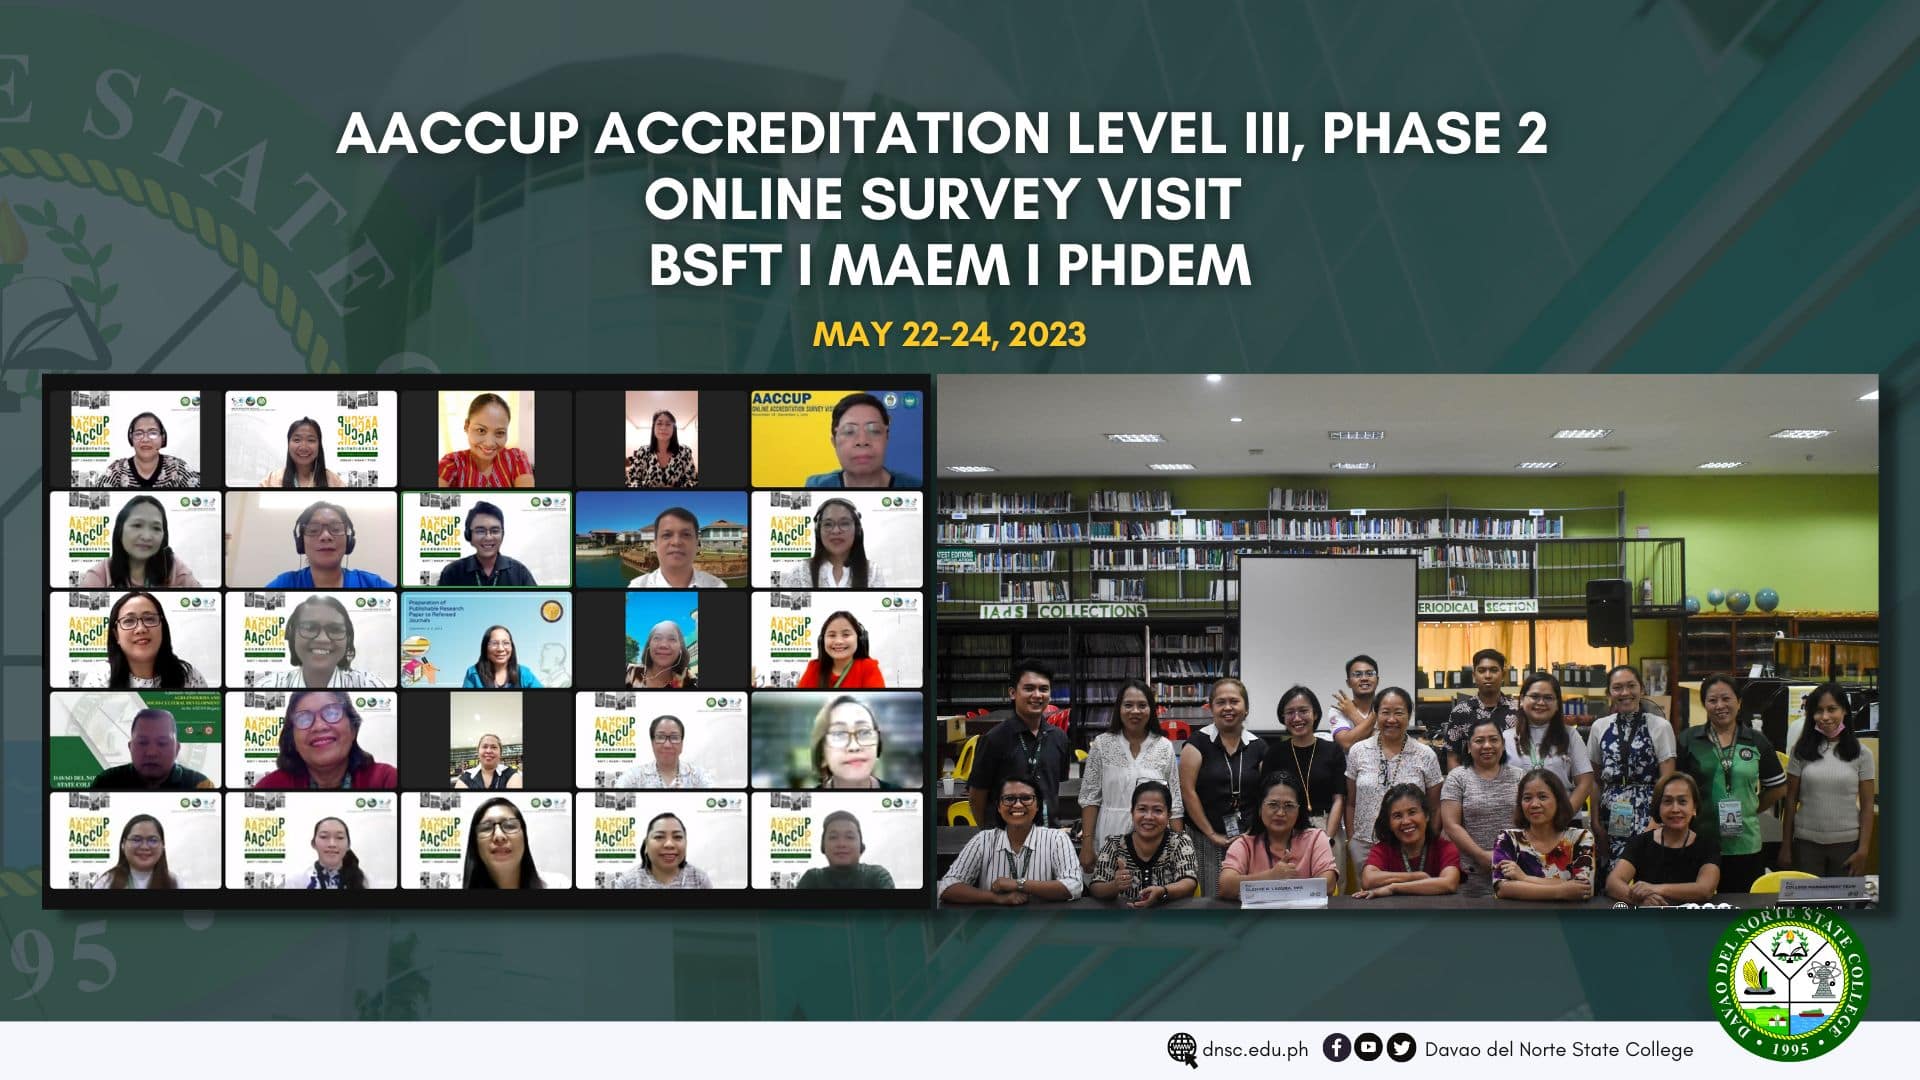 AACCUP Accreditation Level III Phase 2 Online Survey Visit BSFT I MAEM I PHDEM